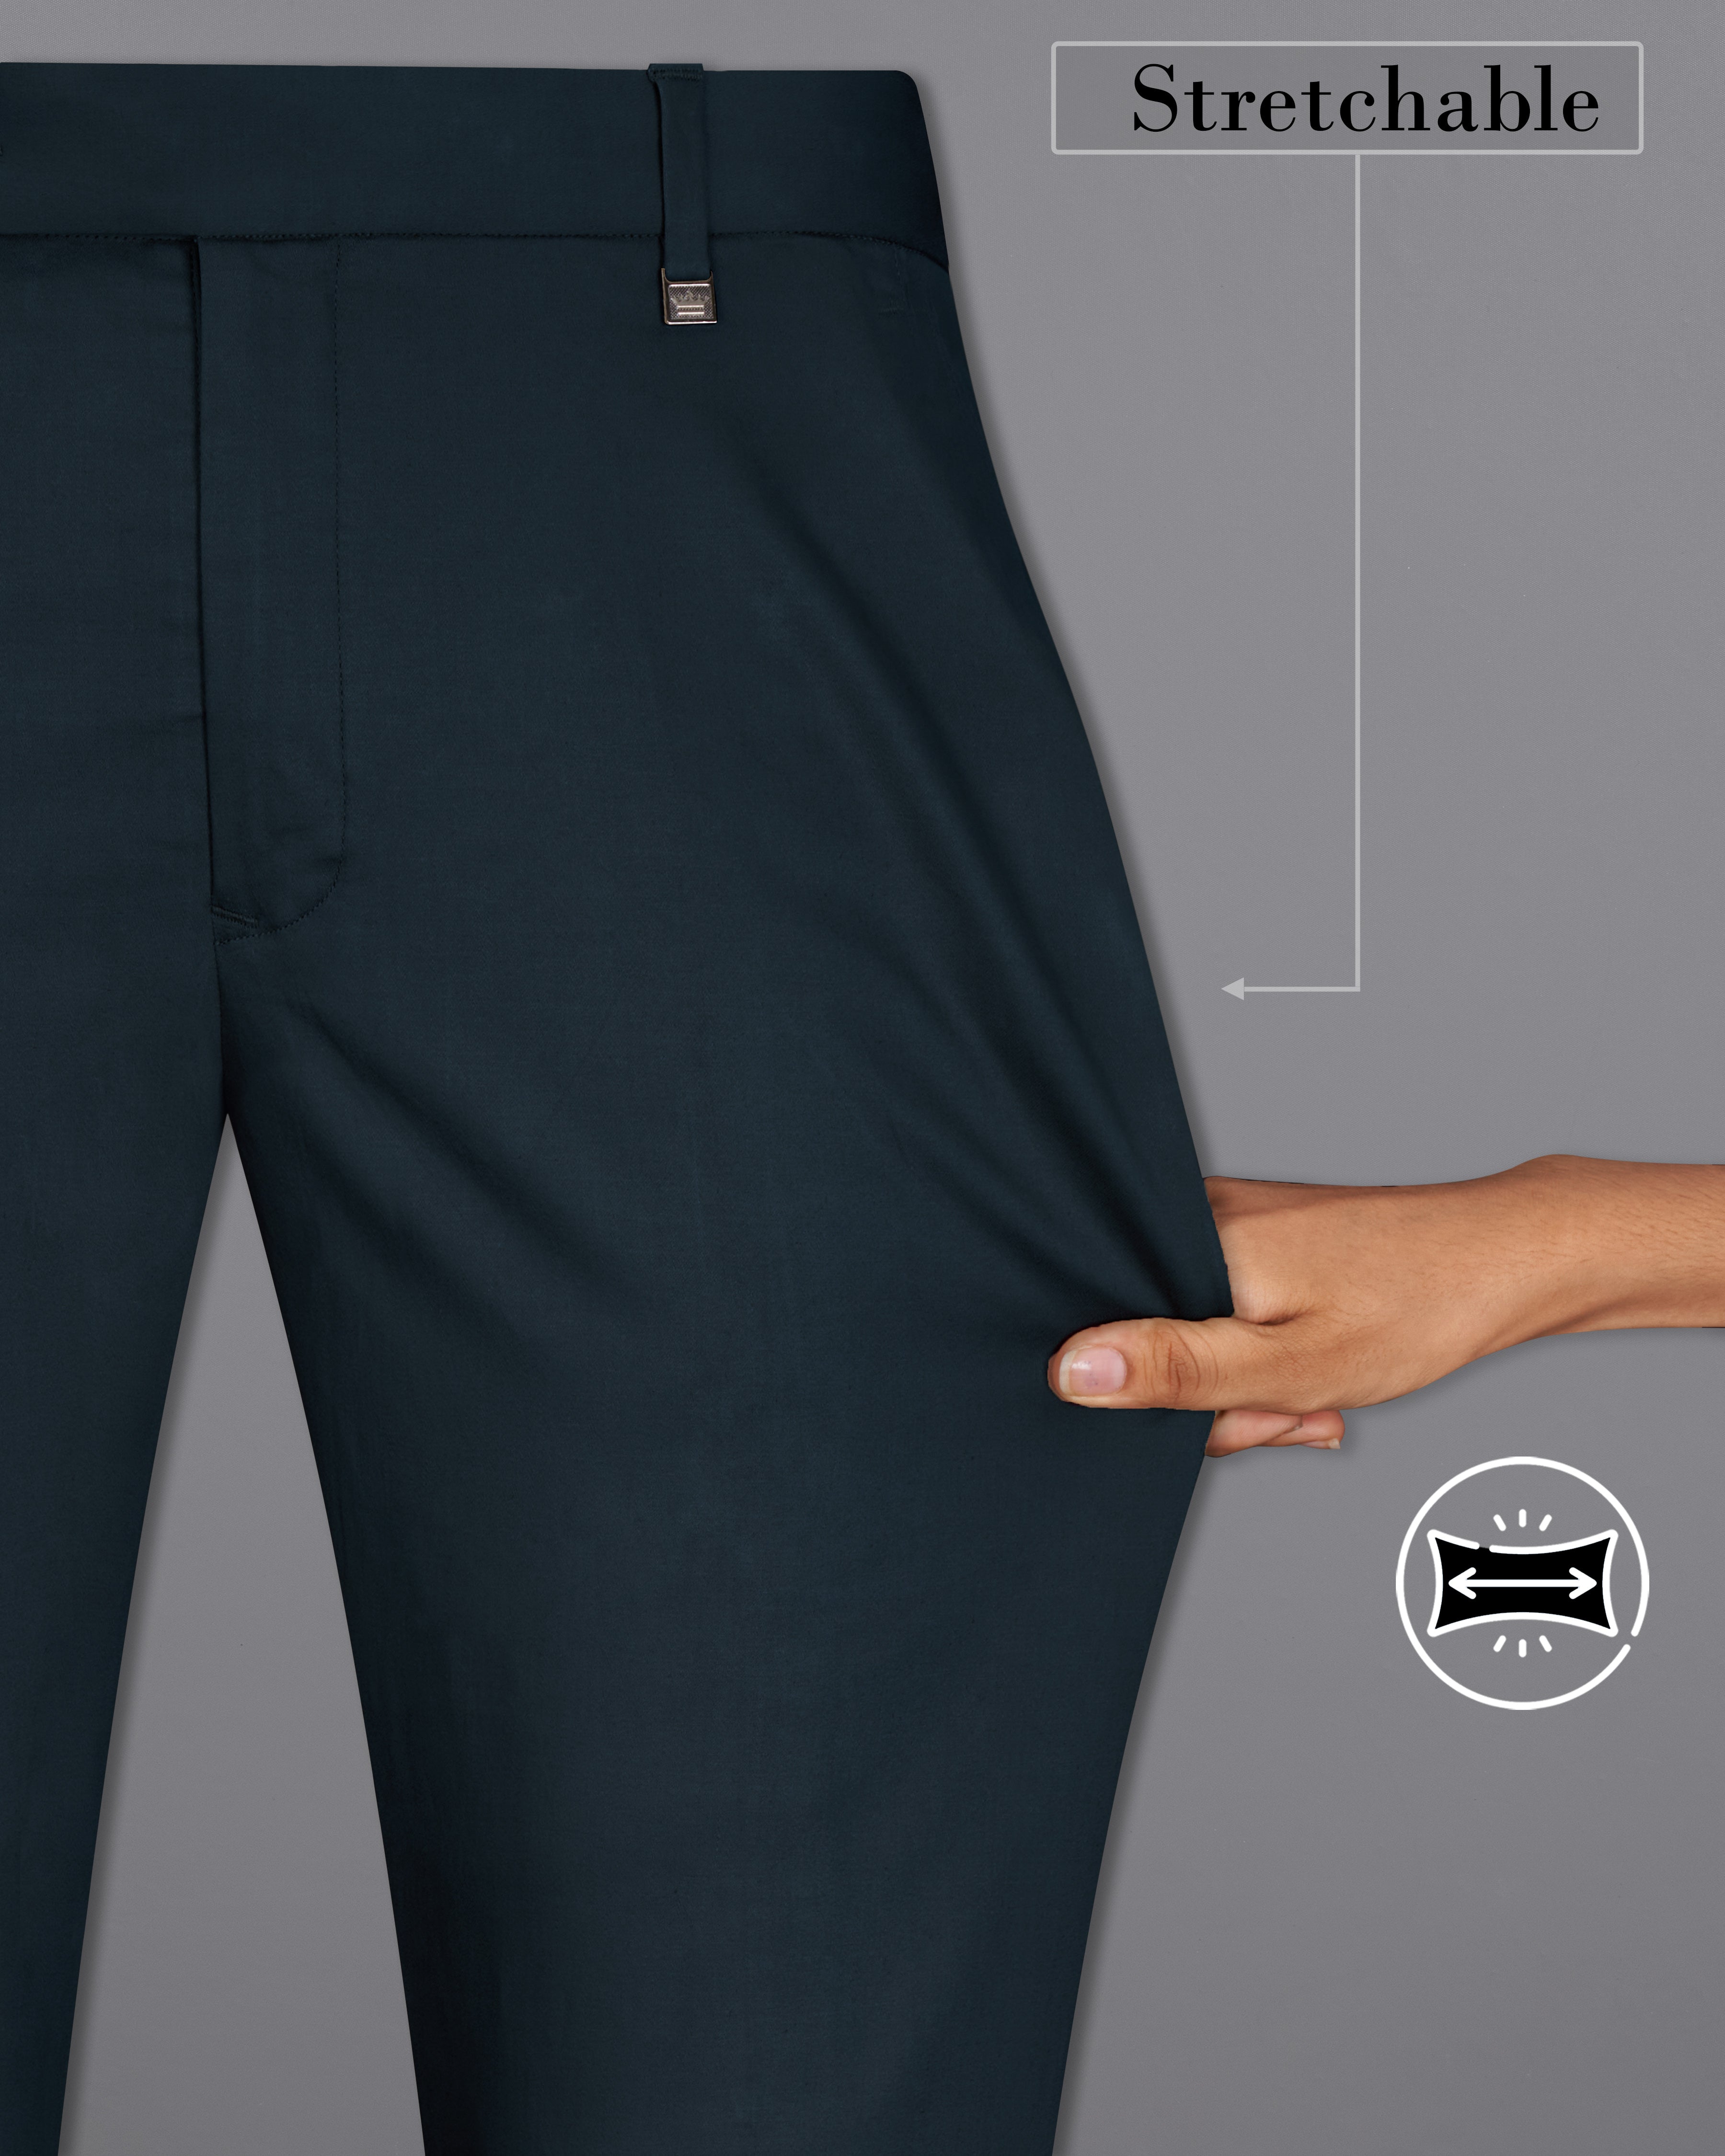 No Fade Grey Color Cotton Fabric Men Plain Stretchable Jogger Pant With 30  To 36 Waist Size at Best Price in Indore | Arihant Entreprises